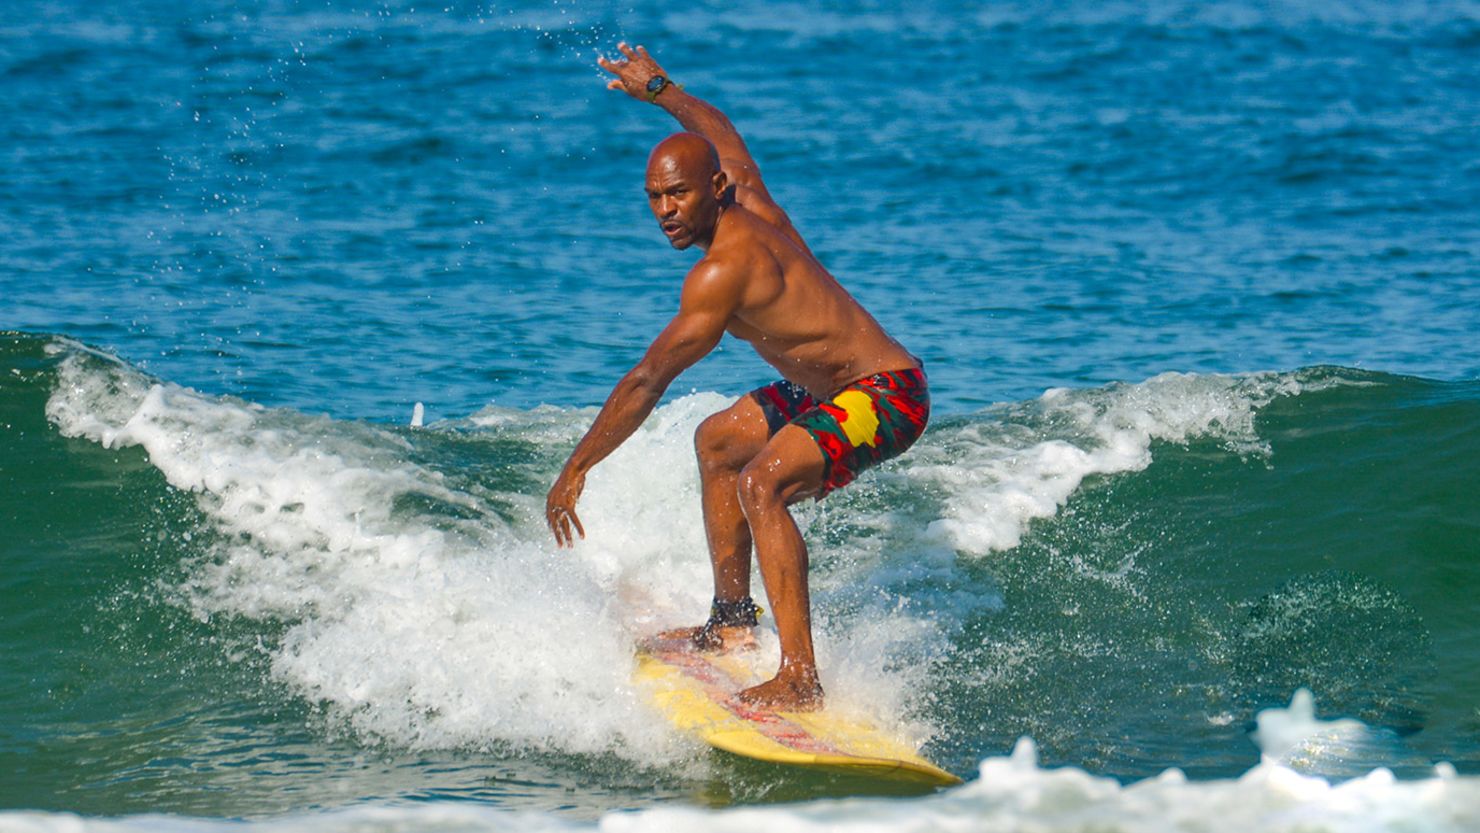 African-American Surfers Challenge Stereotypes